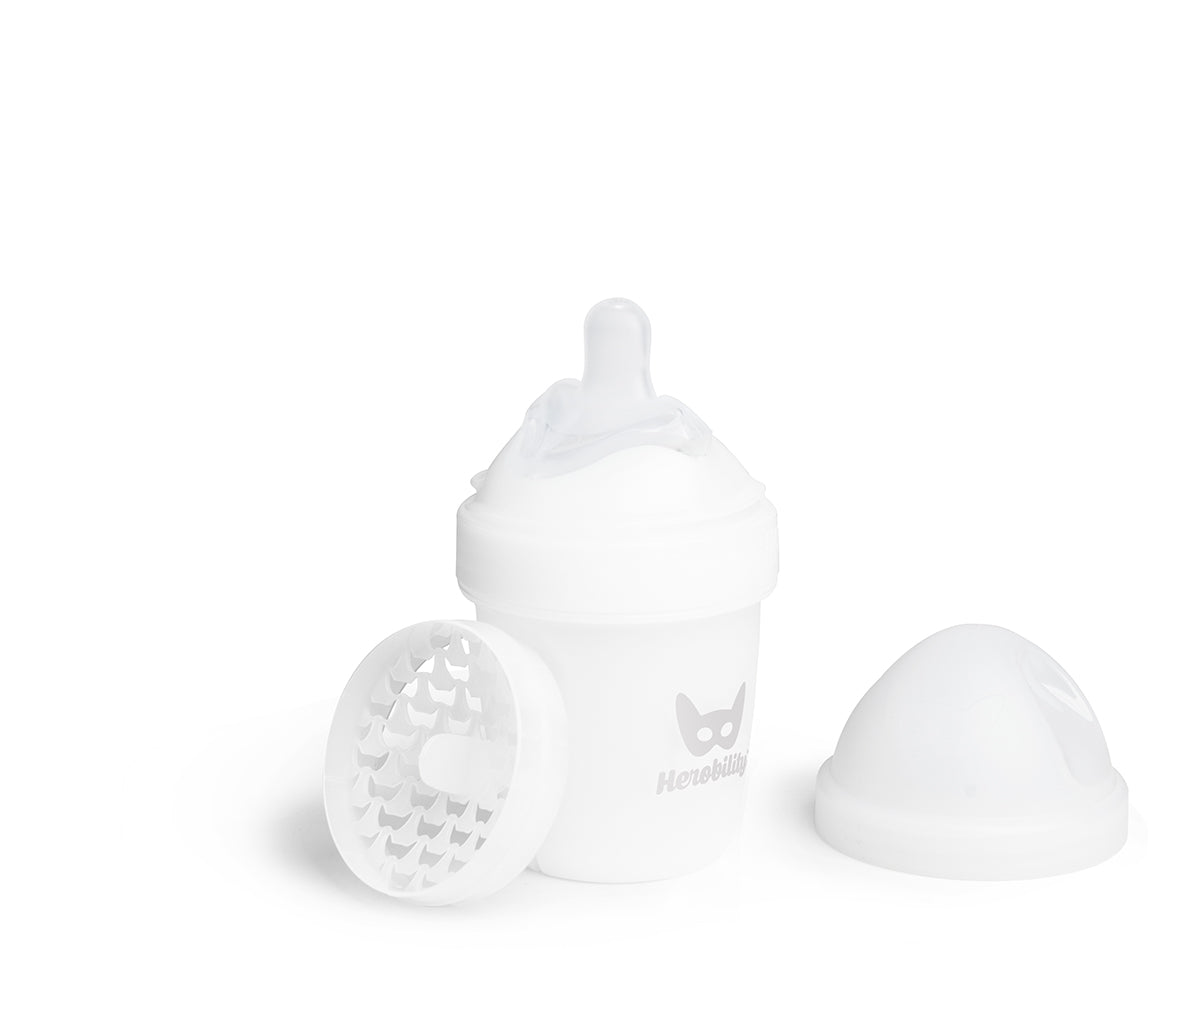 4-pack LT 140ml/5 floz Baby Bottles with 30% discount